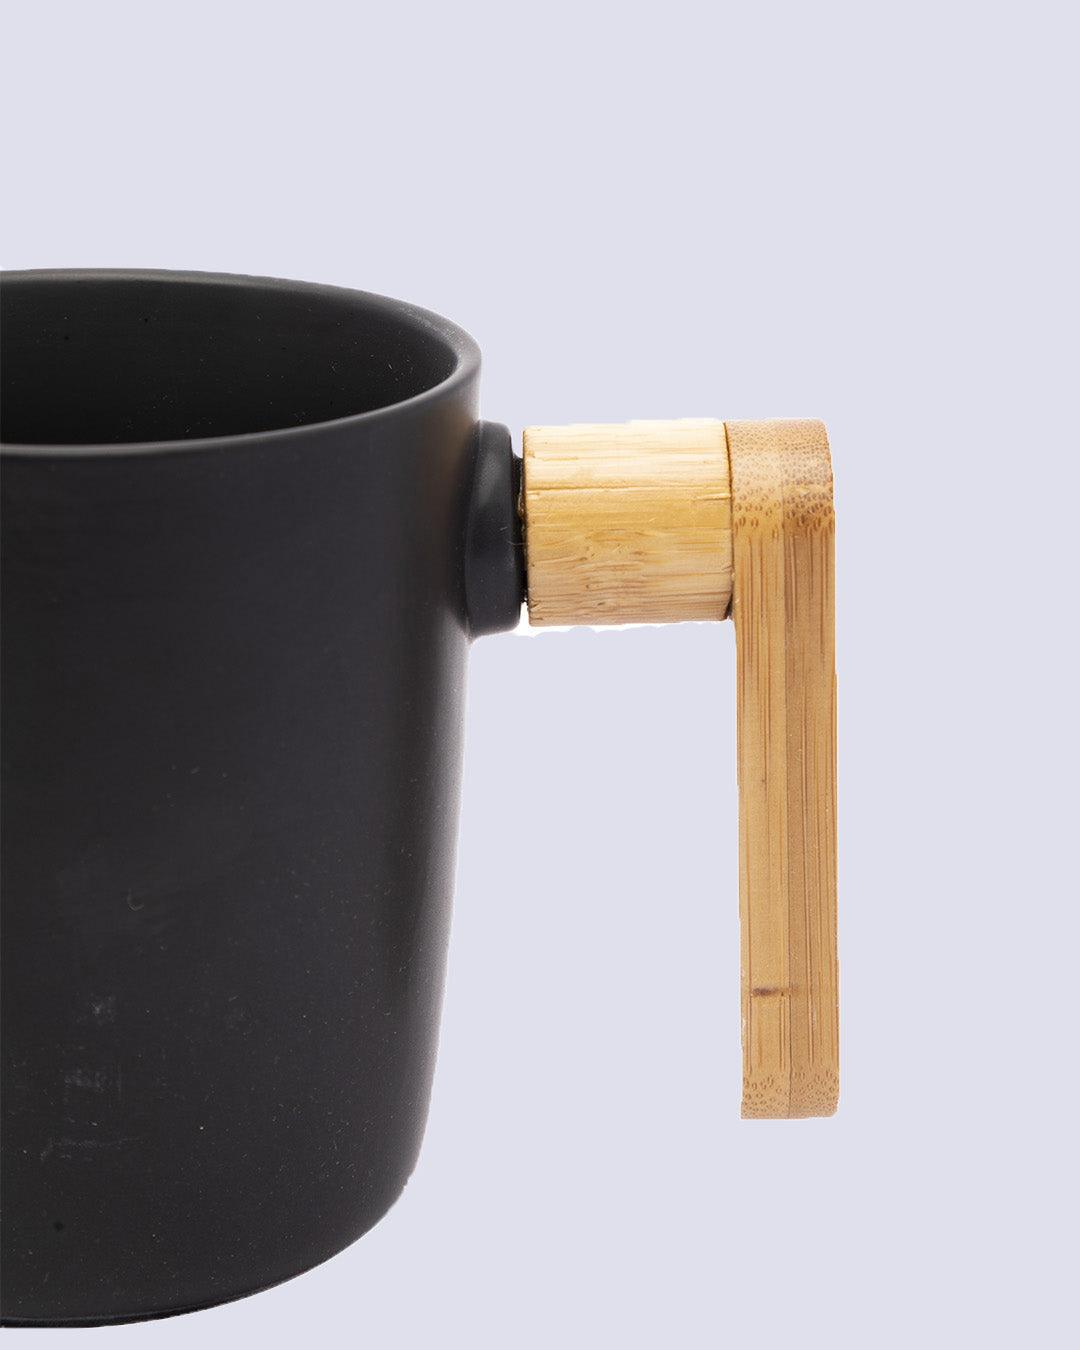 Market99 Mugs, with Wooden Tray, for Home, Office, Restaurants, Black, Ceramic & Bamboo, Set of 2 - MARKET 99